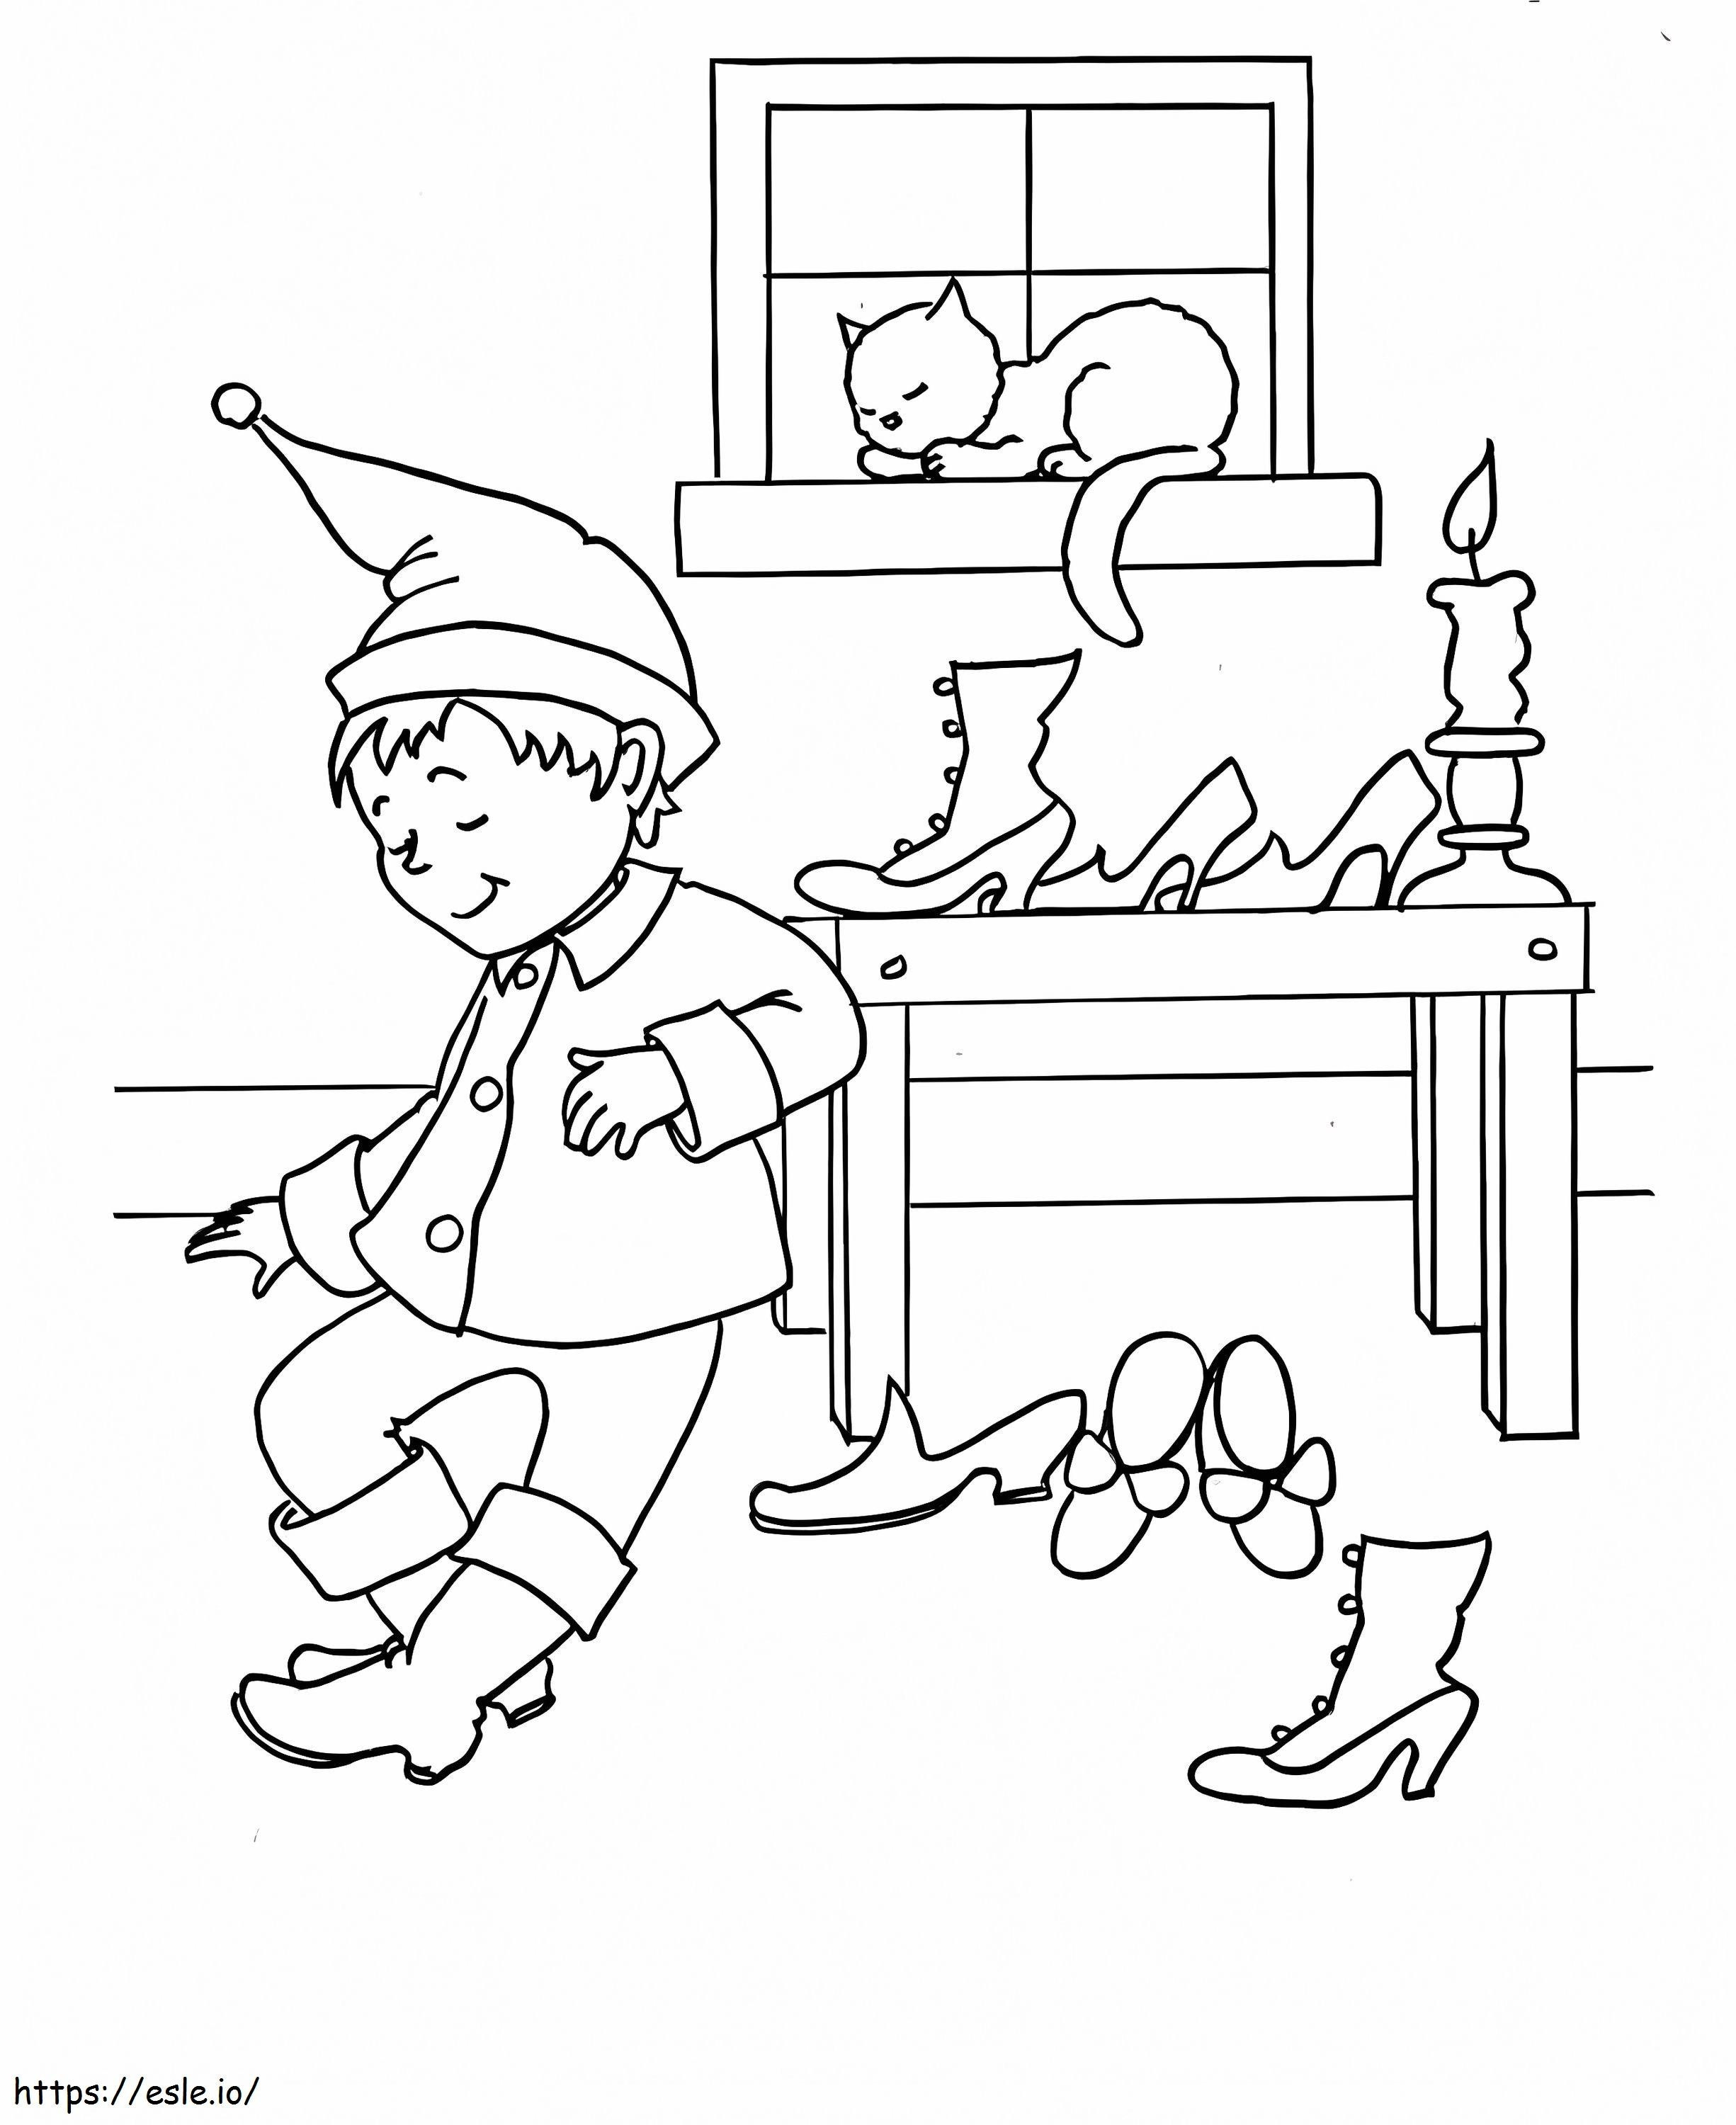 Charming Elf coloring page